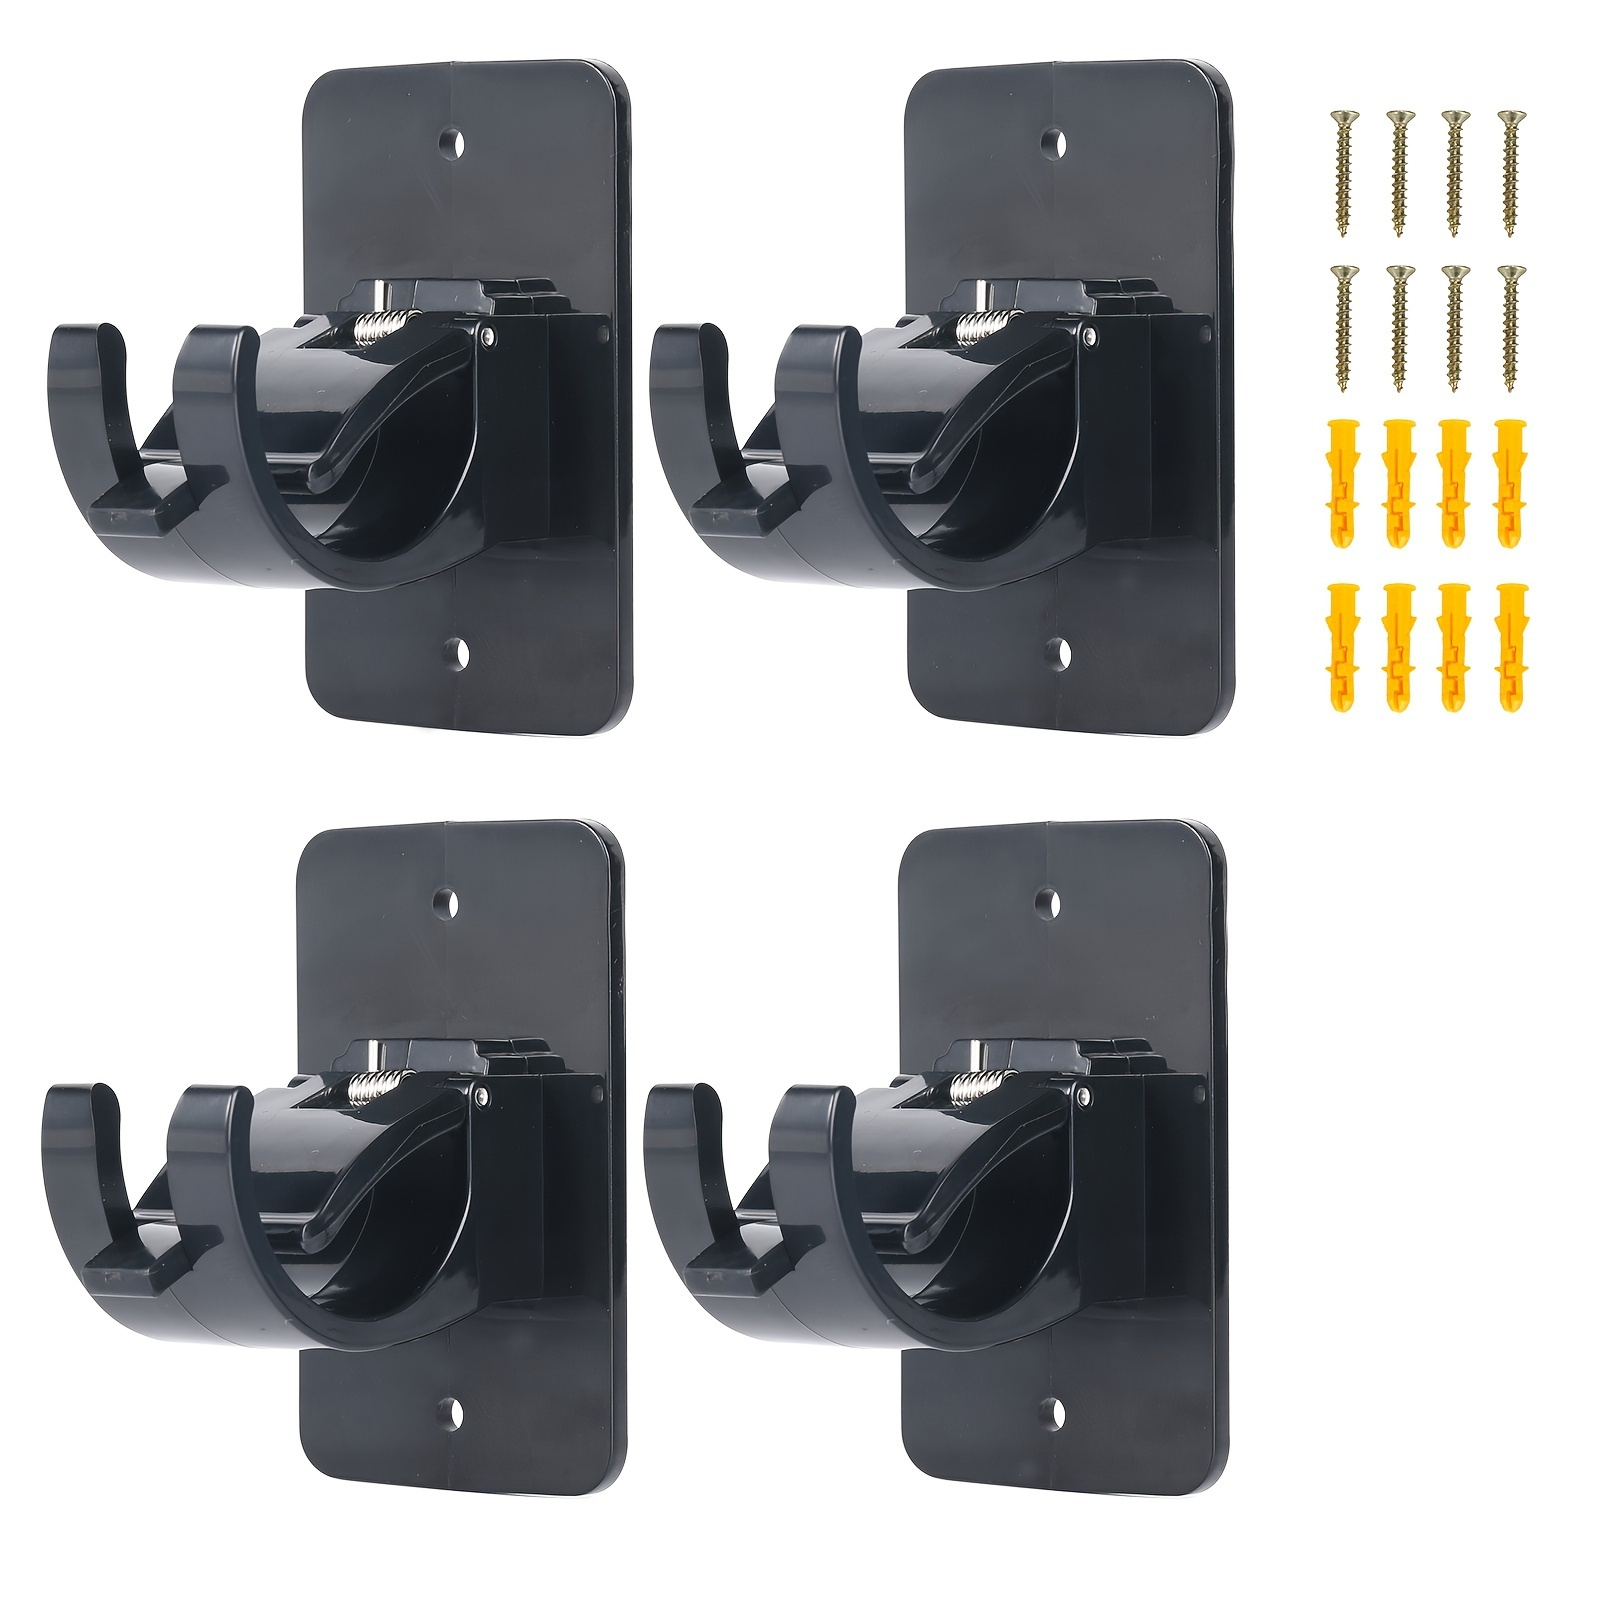 

4pcs Curtain Pole Brackets, No Drill Self Adhesive Curtain Rod Hooks, Curtain Hangers For Poles, Less Than 40mm In Diameter Pole With Screws (curtain Rod Not Included)